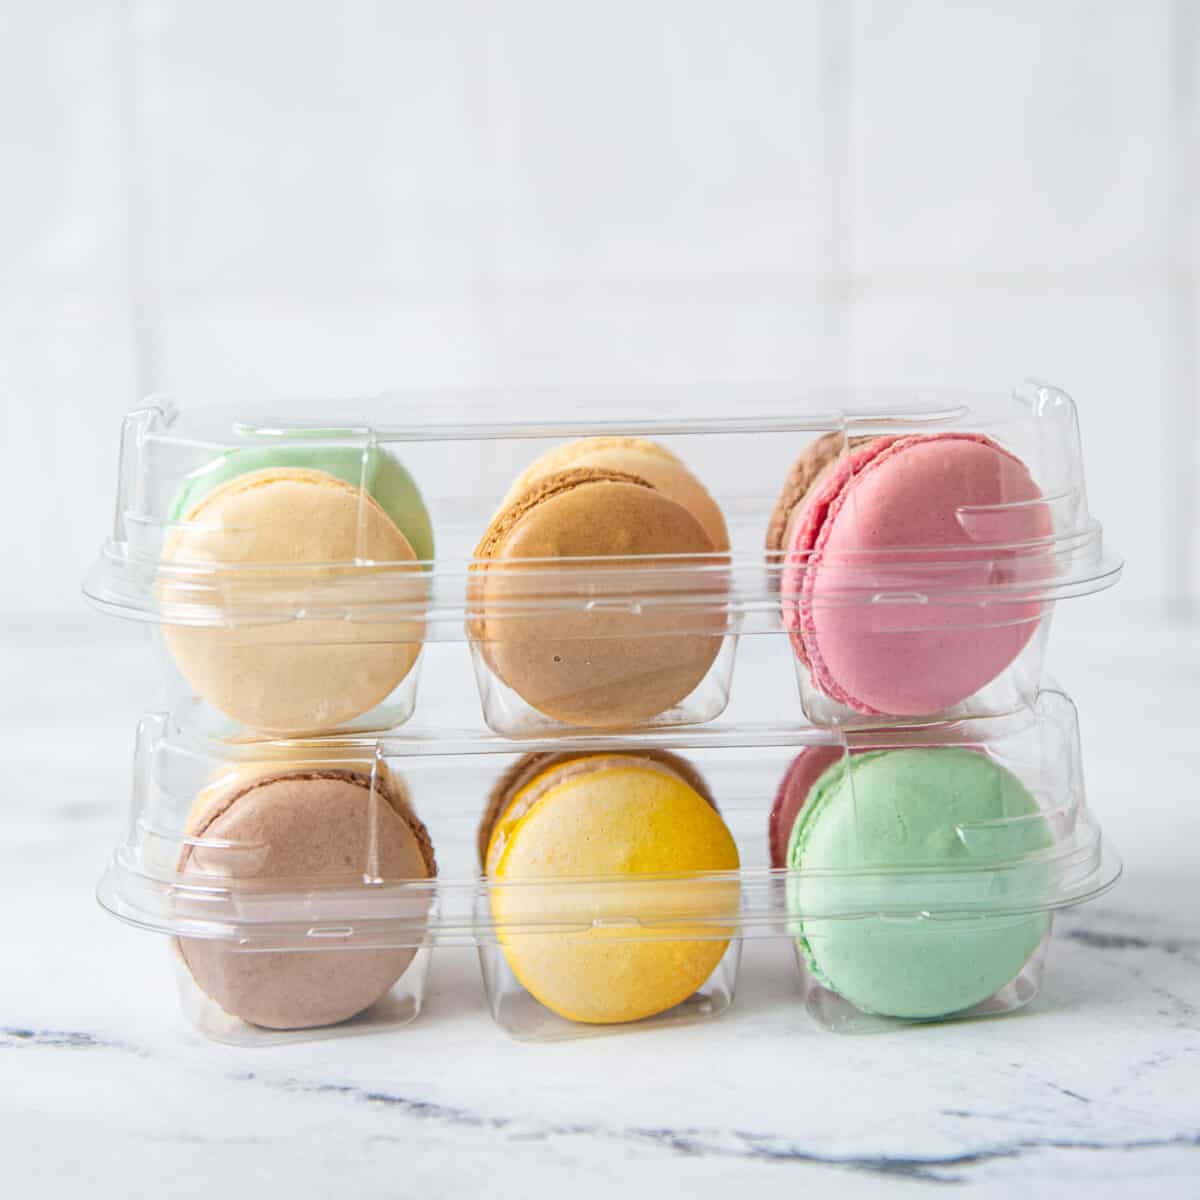 A variety of colored macarons packaged in two clear containers.